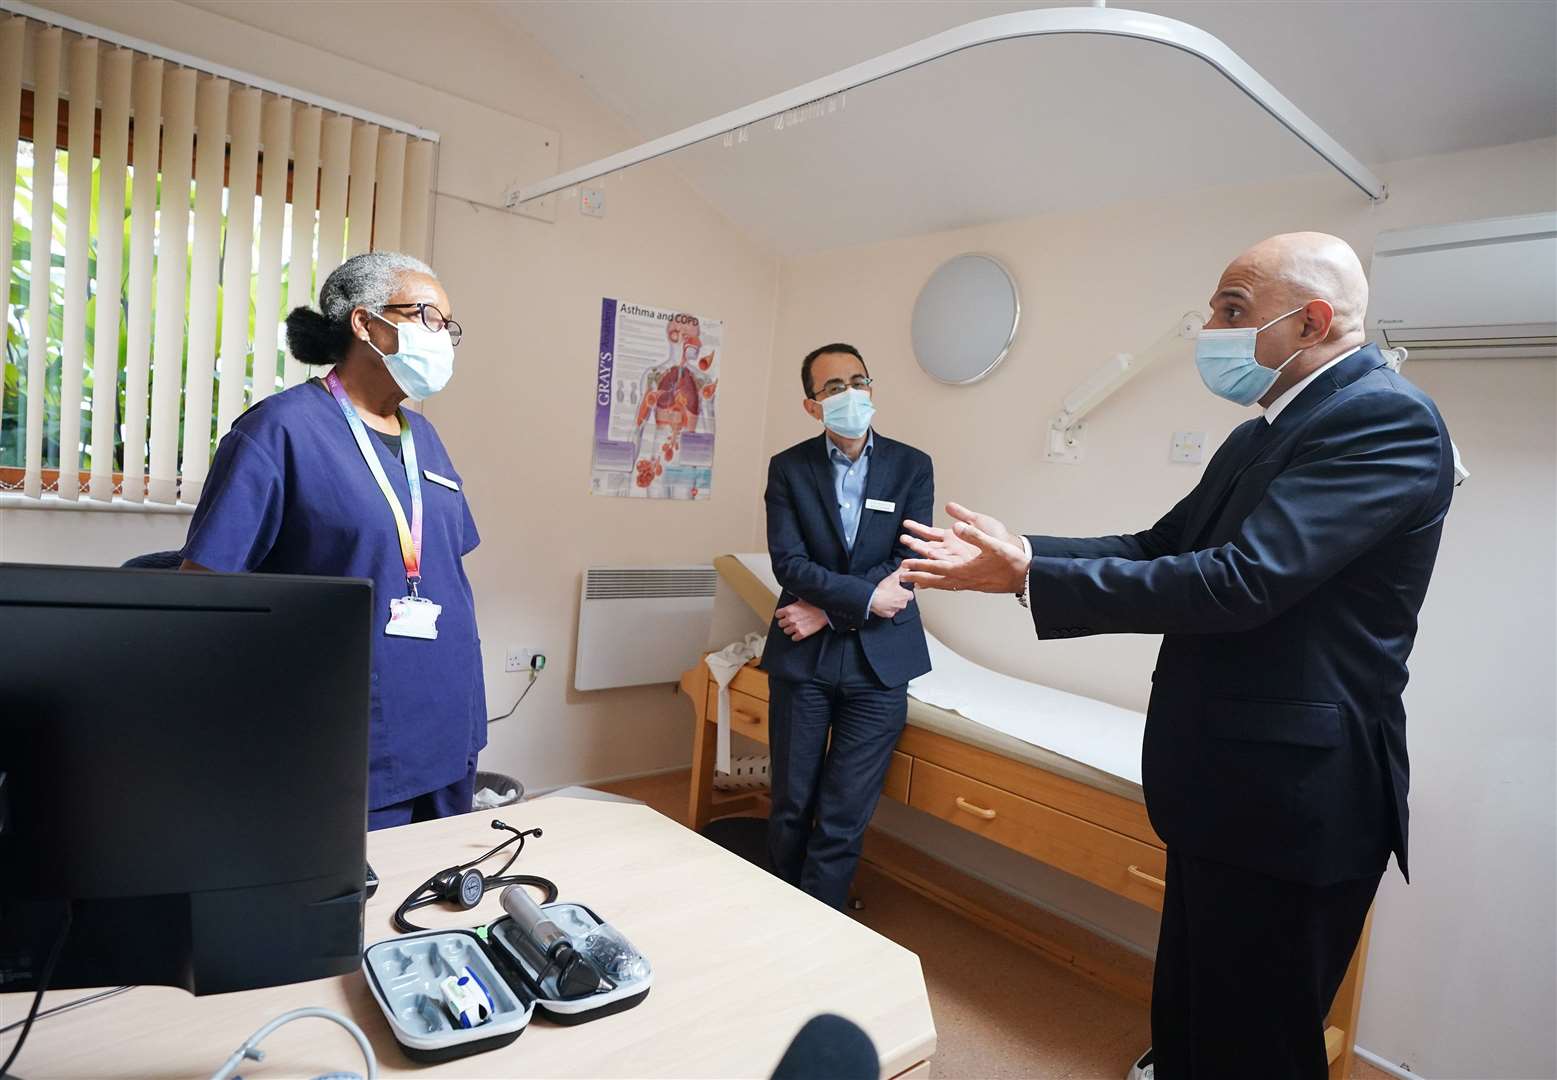 Health Secretary Sajid Javid meeting Dr Clementine Olenga-Disashi (left) and Dr Ali al-Bassam, during a visit to the Vale Medical Centre in Forest Hill, south-east London (Yui Mok/PA)